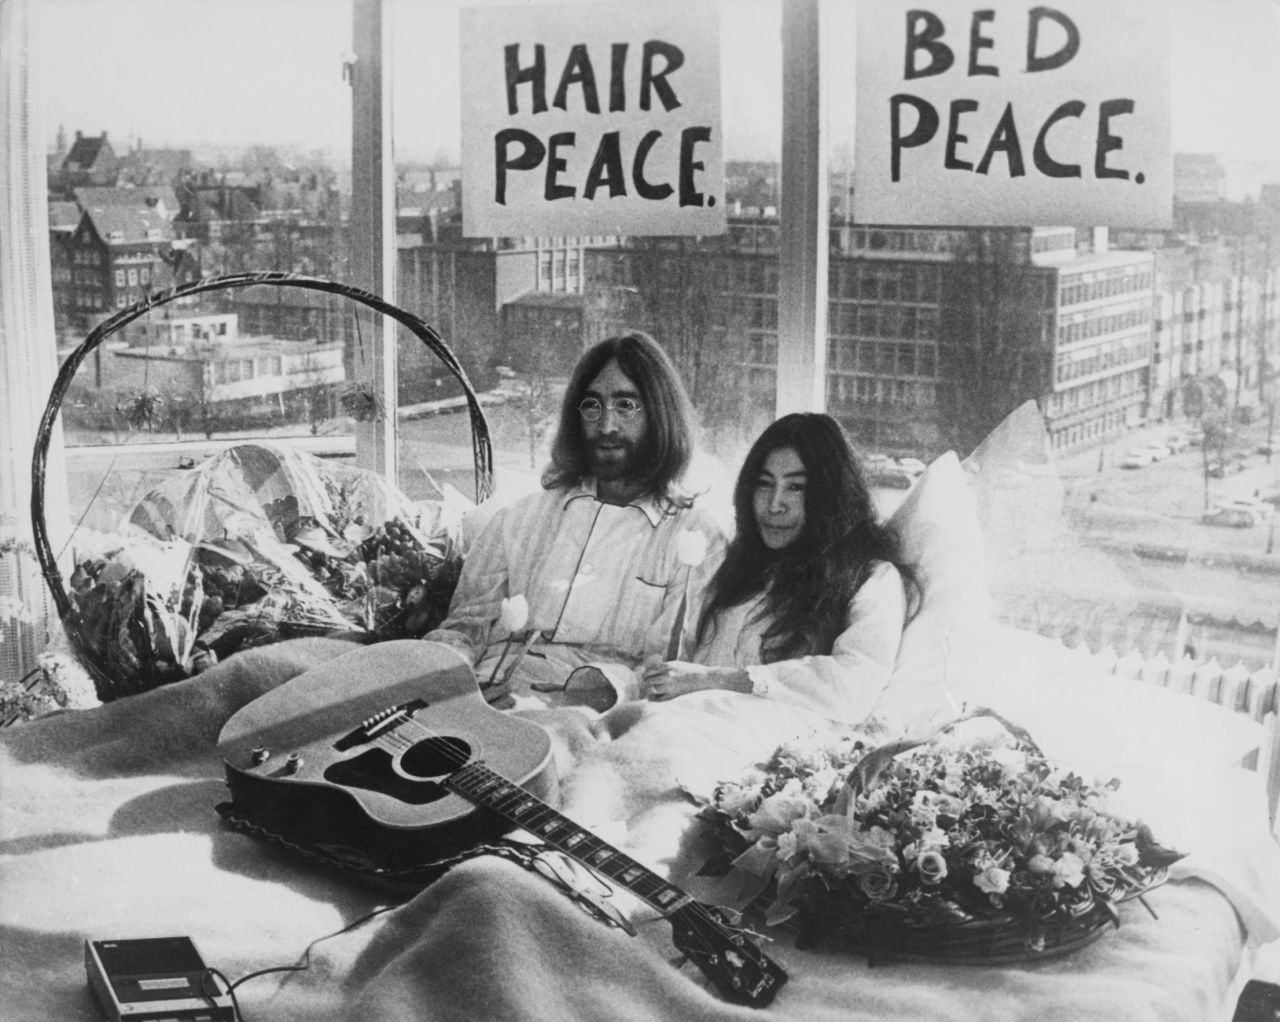 John and Yoko held their legendary "bed-in" at the Hilton Amsterdam. He wrote "Imagine" at a Hilton in New York. Was it the in-room TVs (a Hilton first) or the natty stationery that drew him to the hotels?